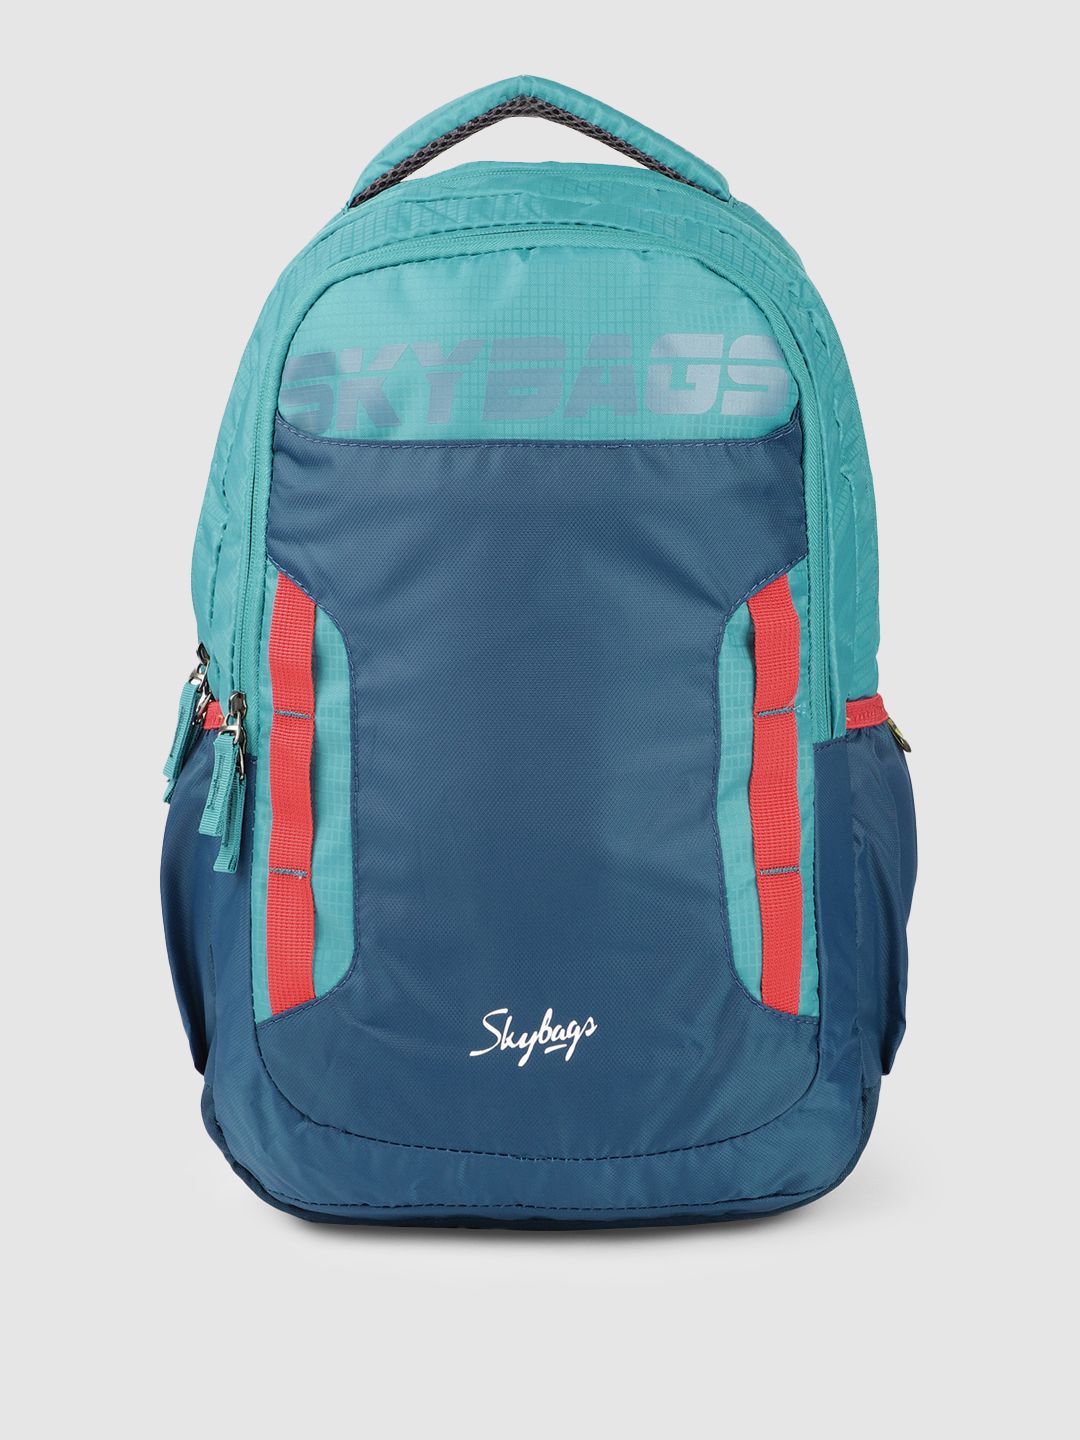 Skybags Unisex Teal Backpack Price in India